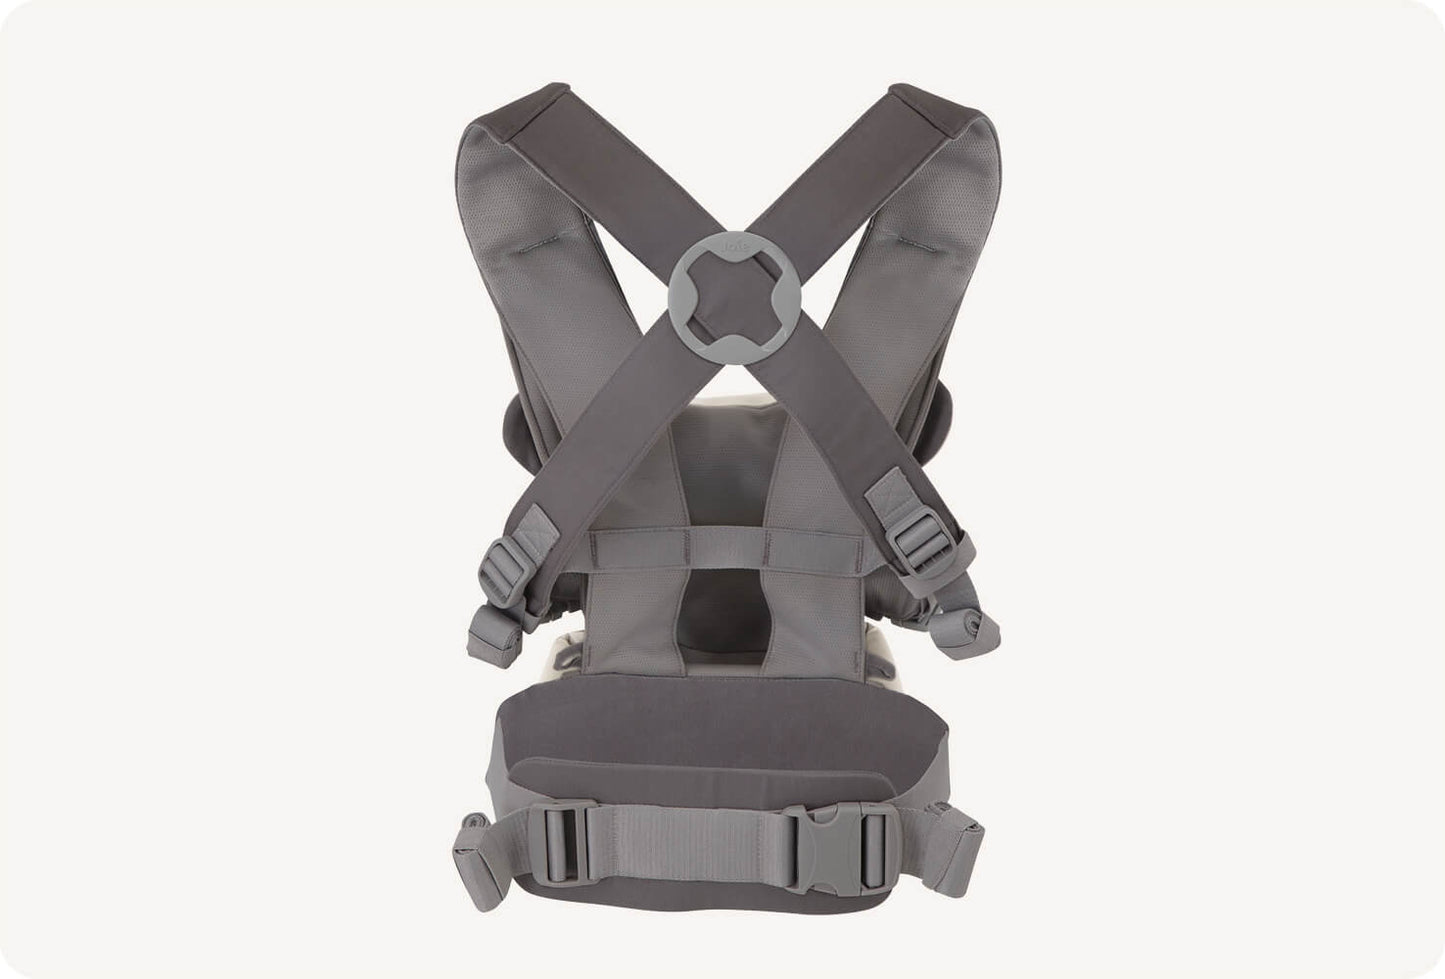 Joie - savvy™ lite 3in1 baby carrier